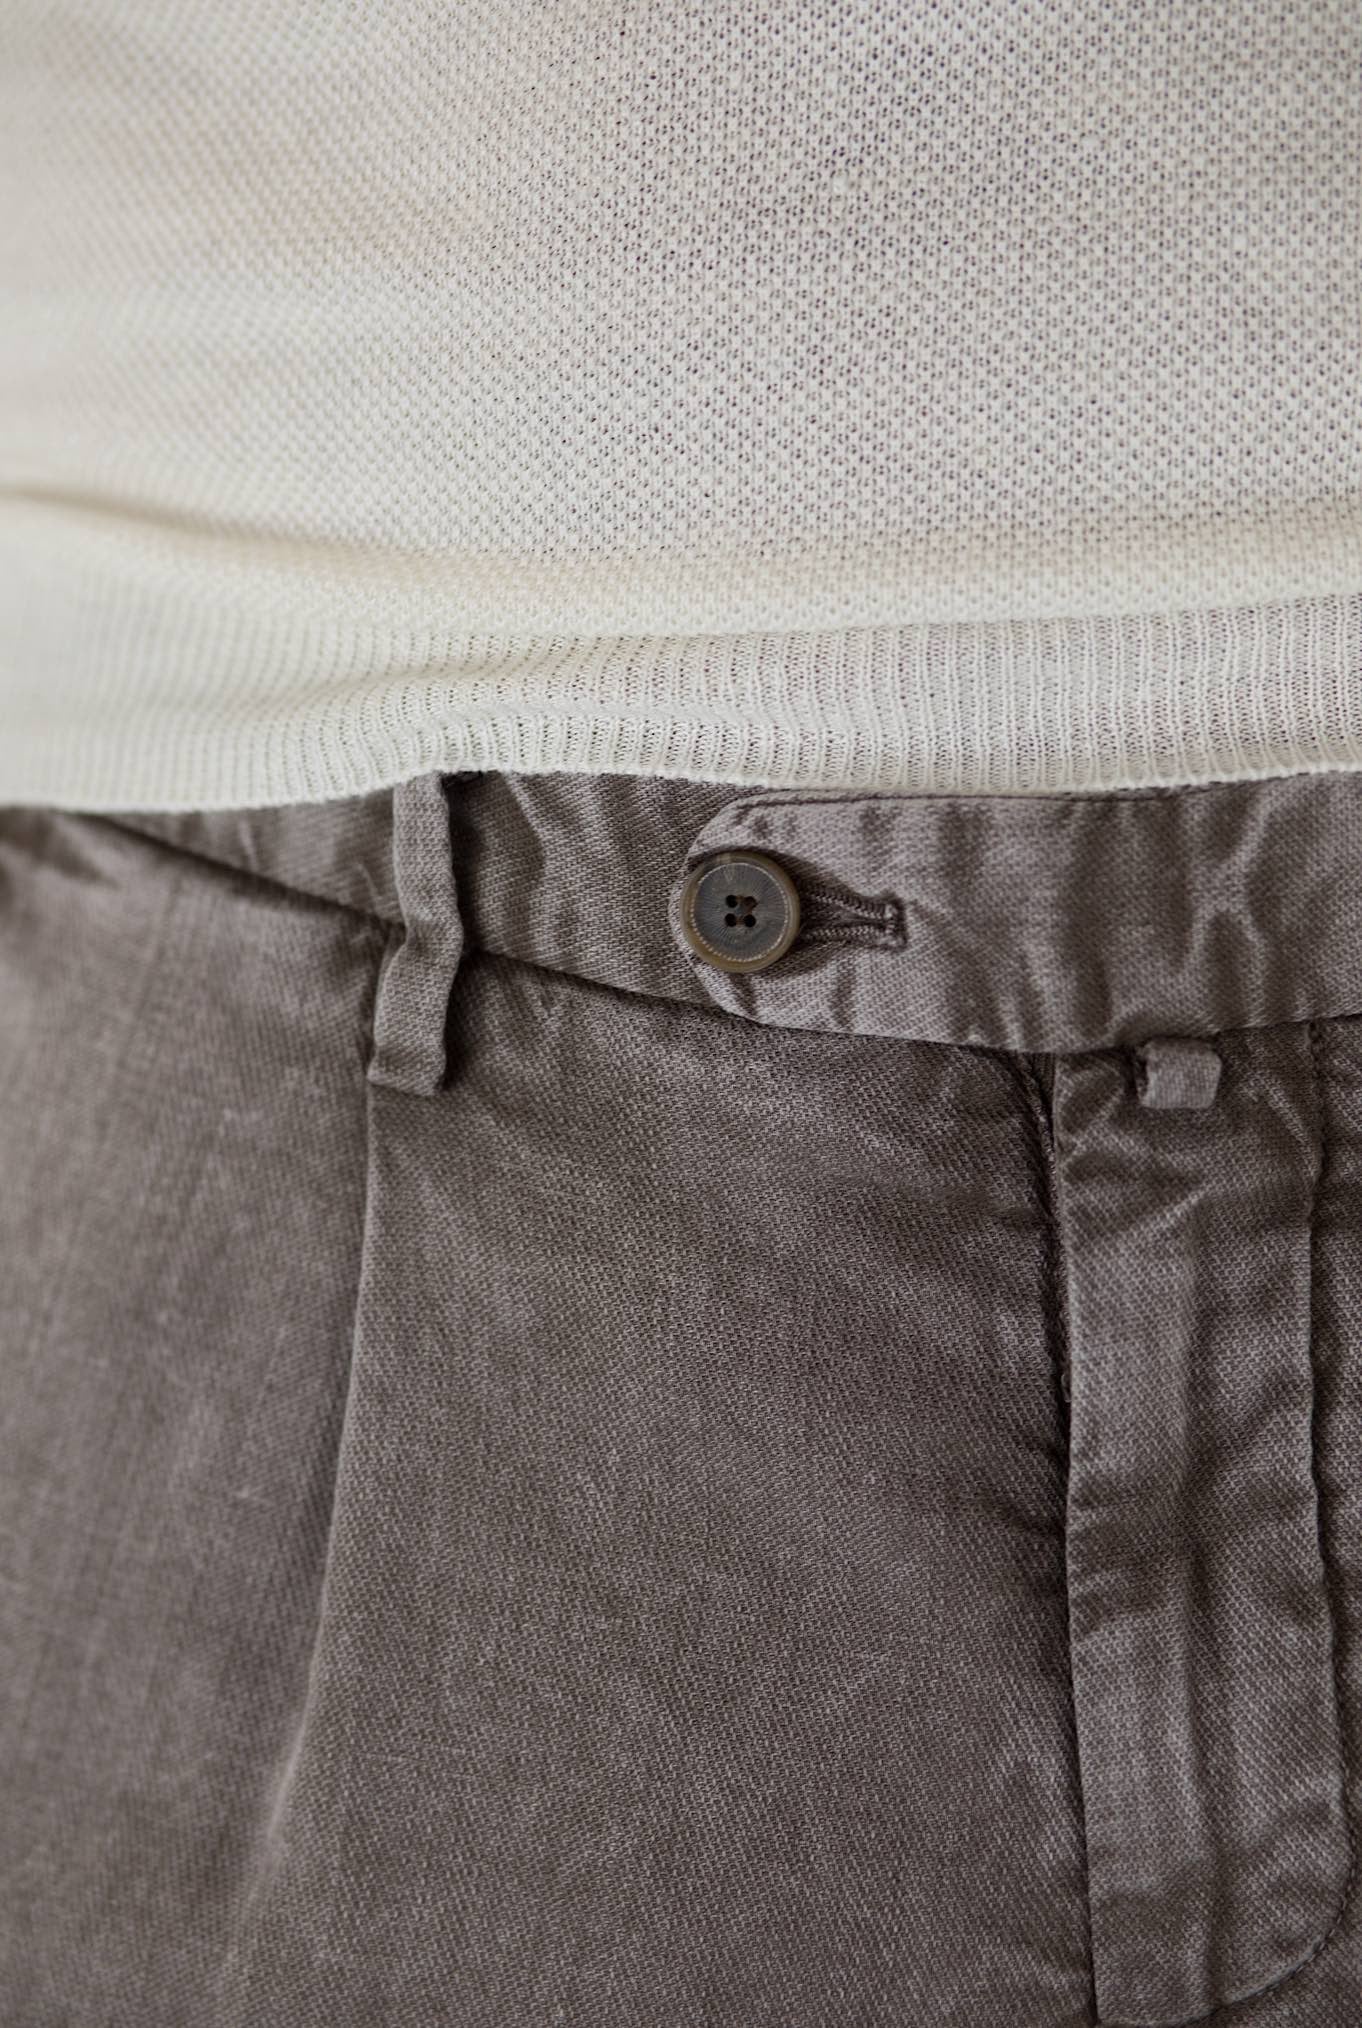 MYTHS Washed Cotton Linen Trousers Dark Brown